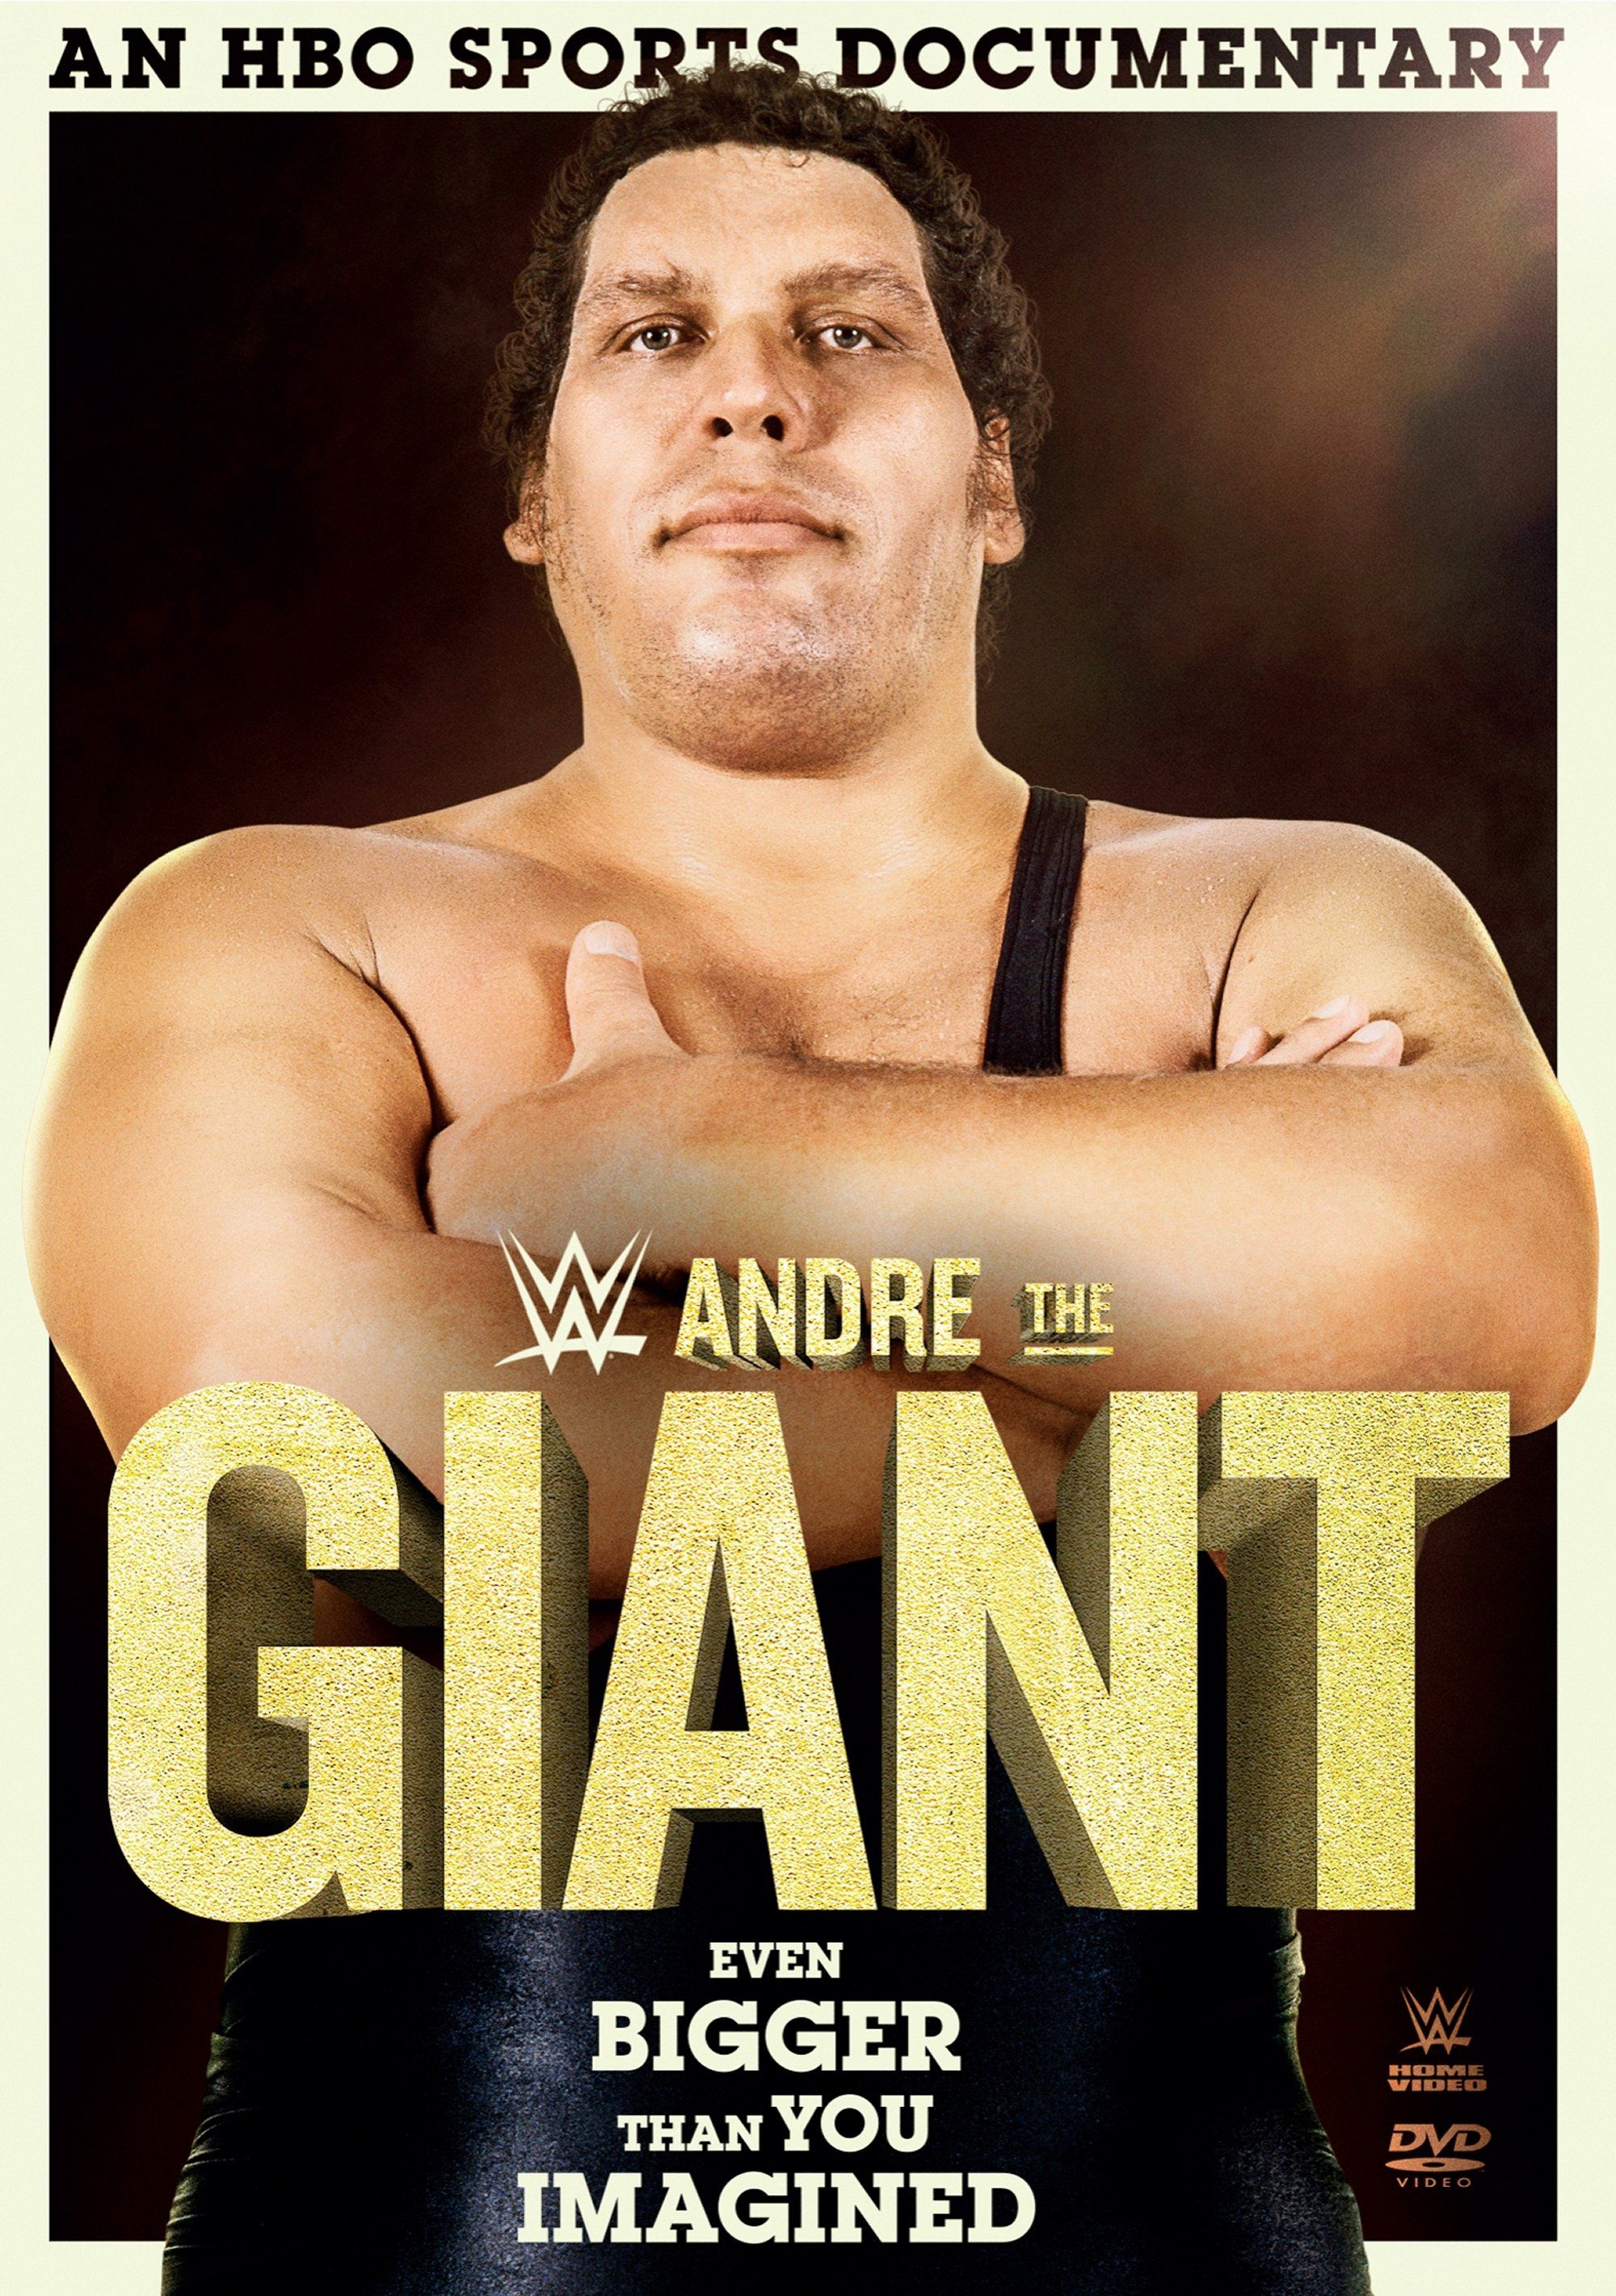 WWE:ANDRE THE GIANT